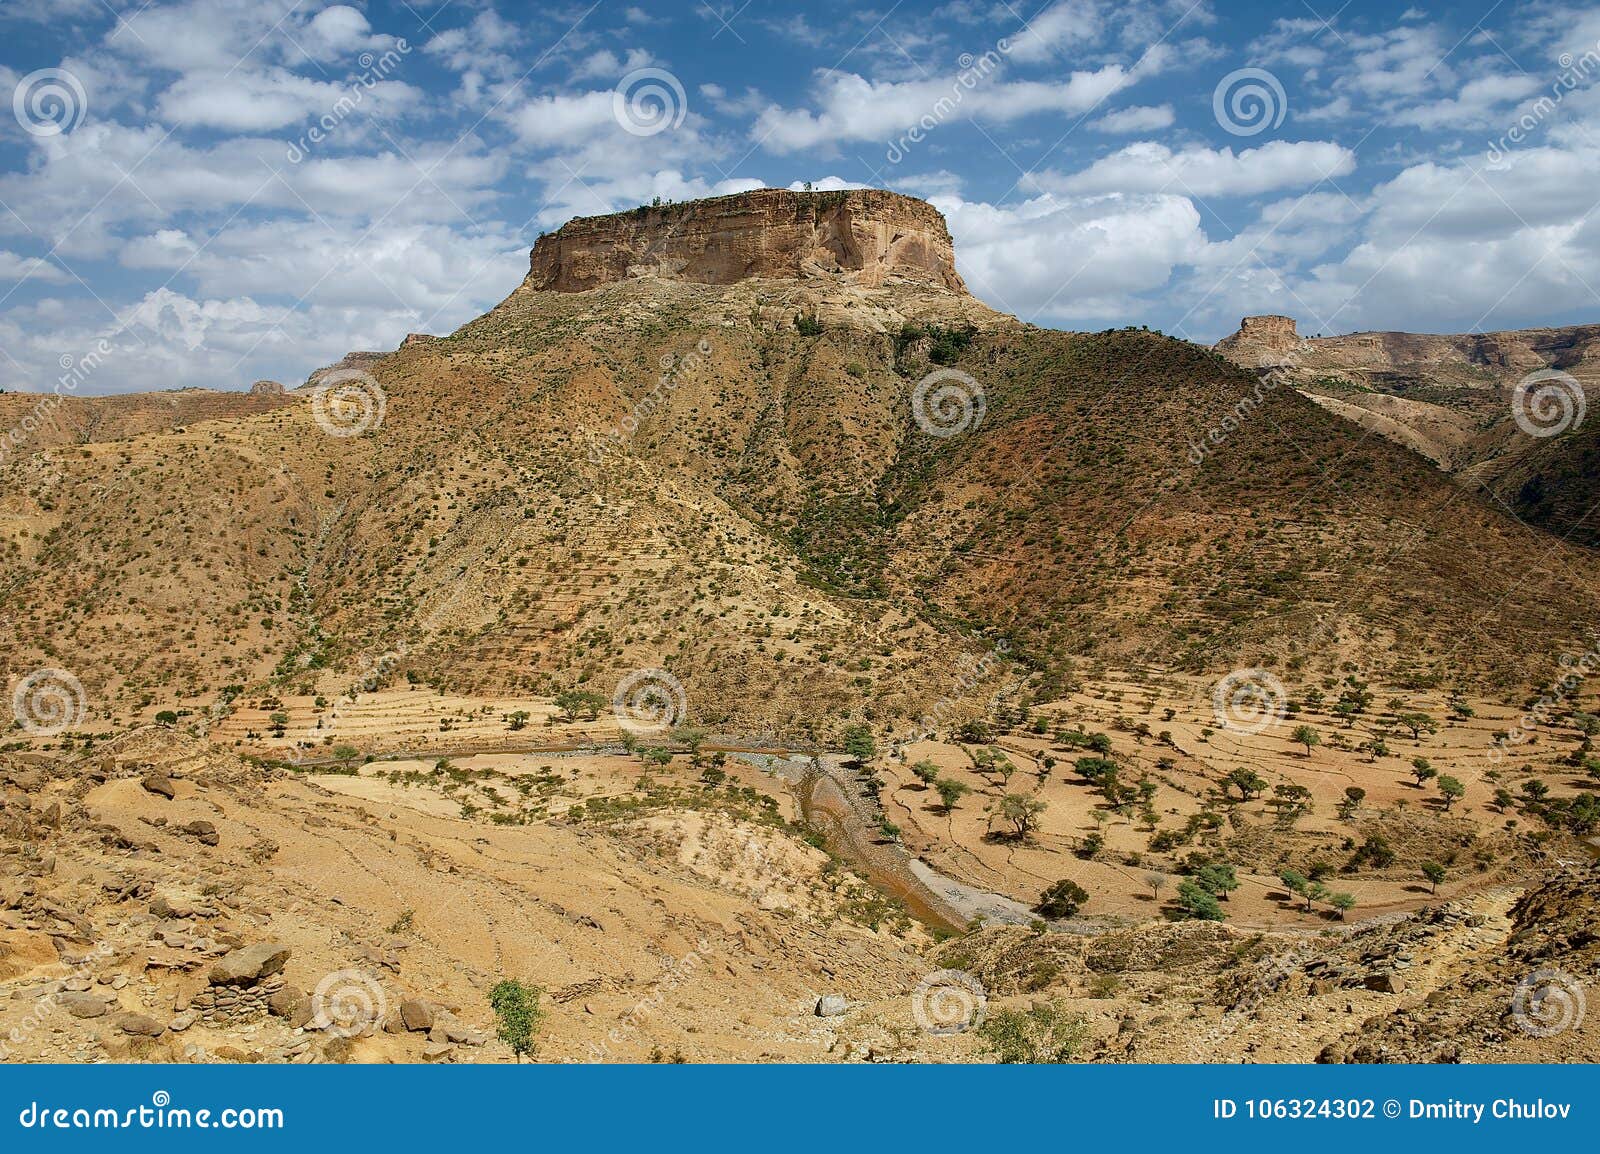 view to the rural surroundings and the hill, on top of which the famous 6-th century ethiopian debre damo monastery is located in